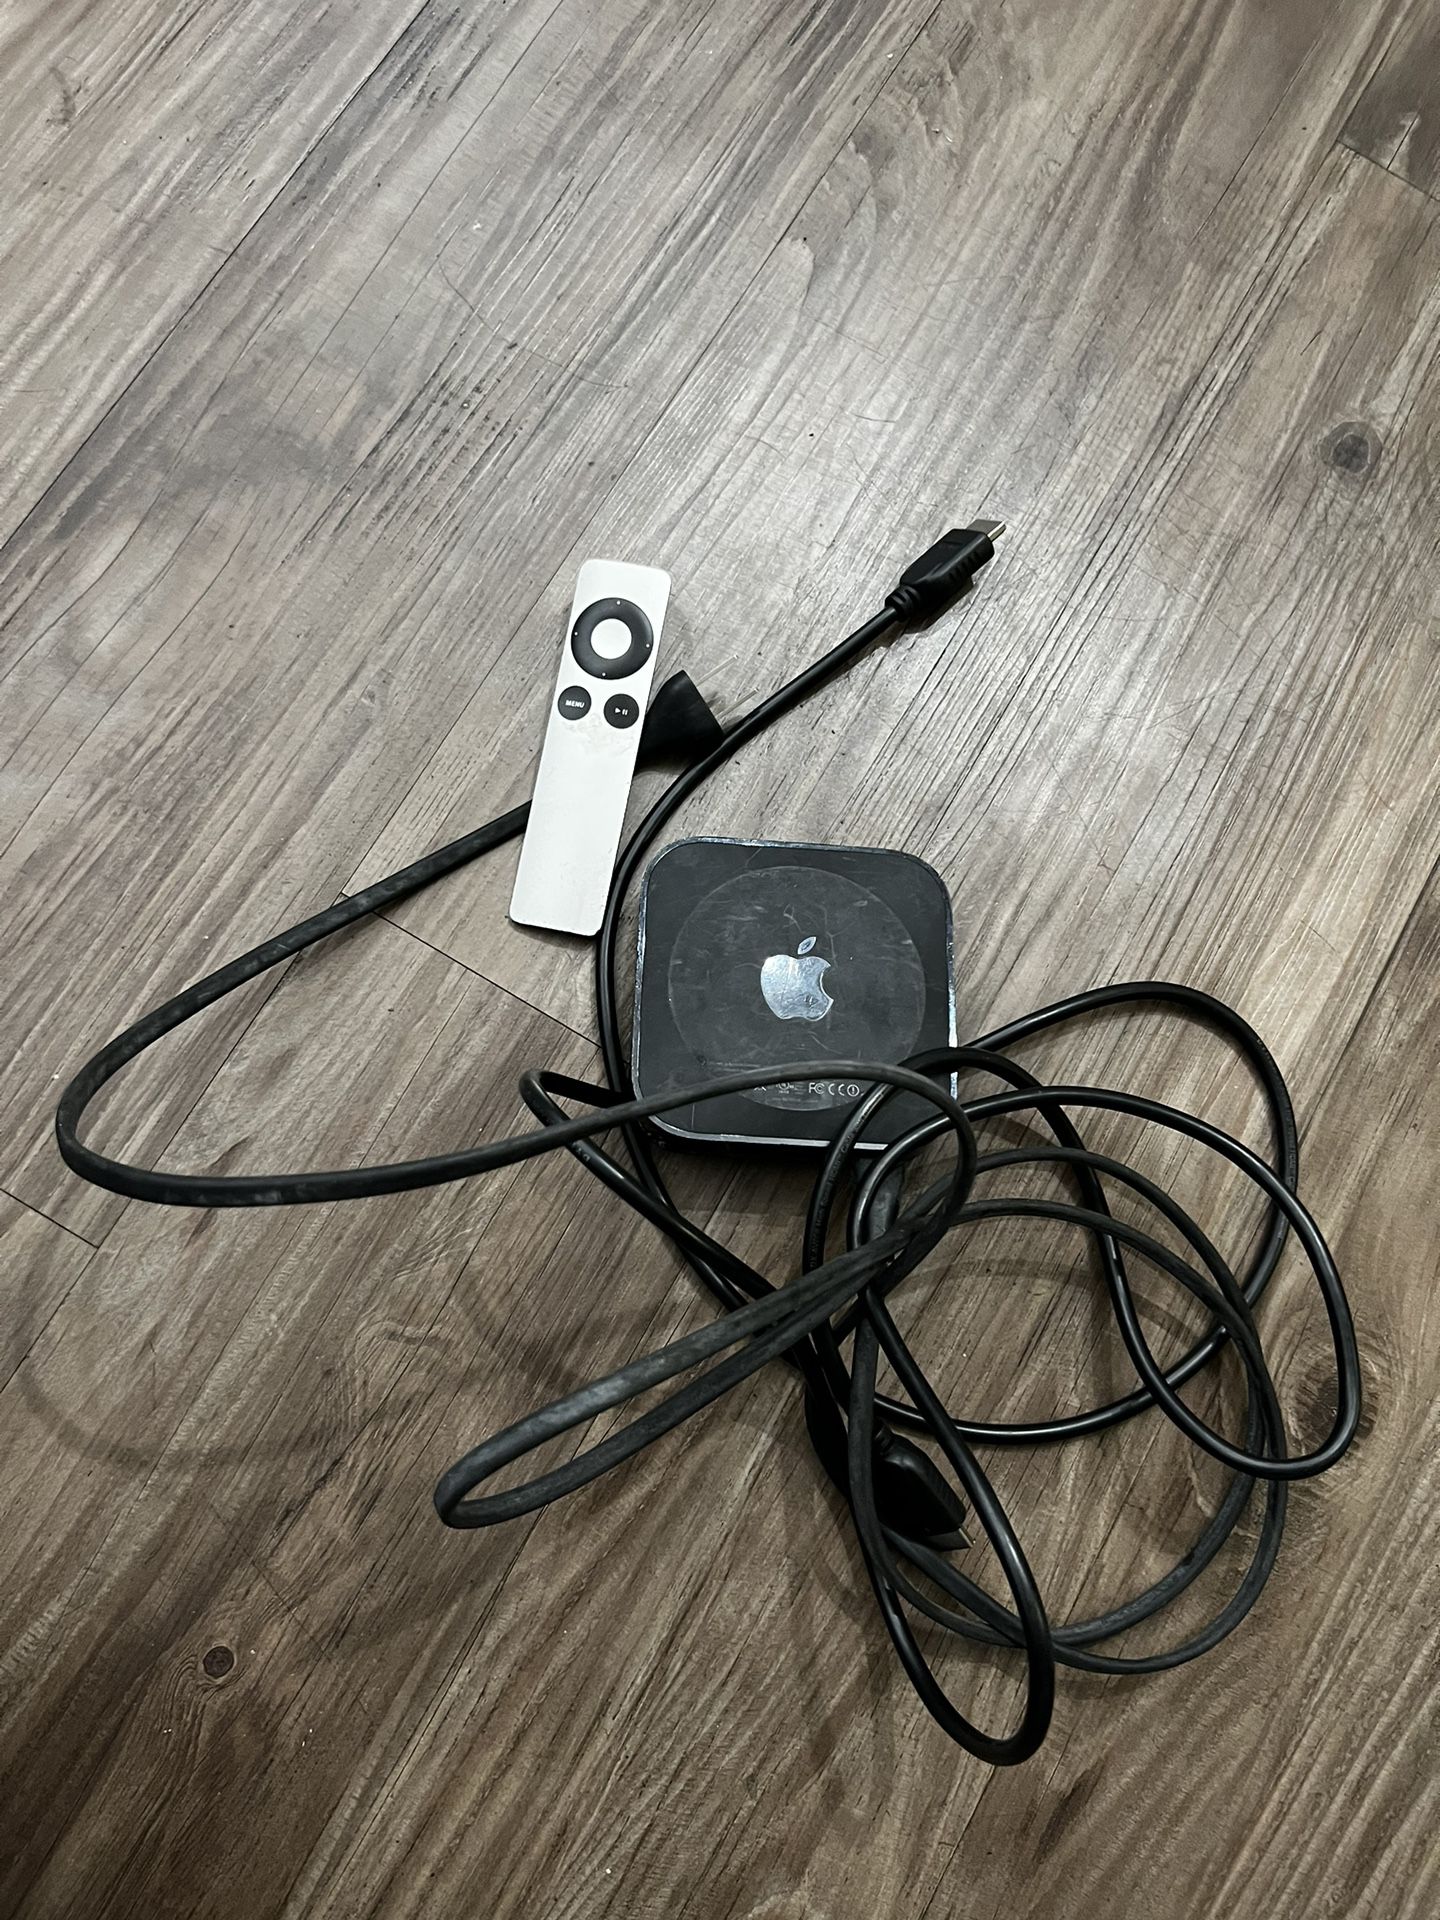 Apple Tv with Remote + Power Supply 